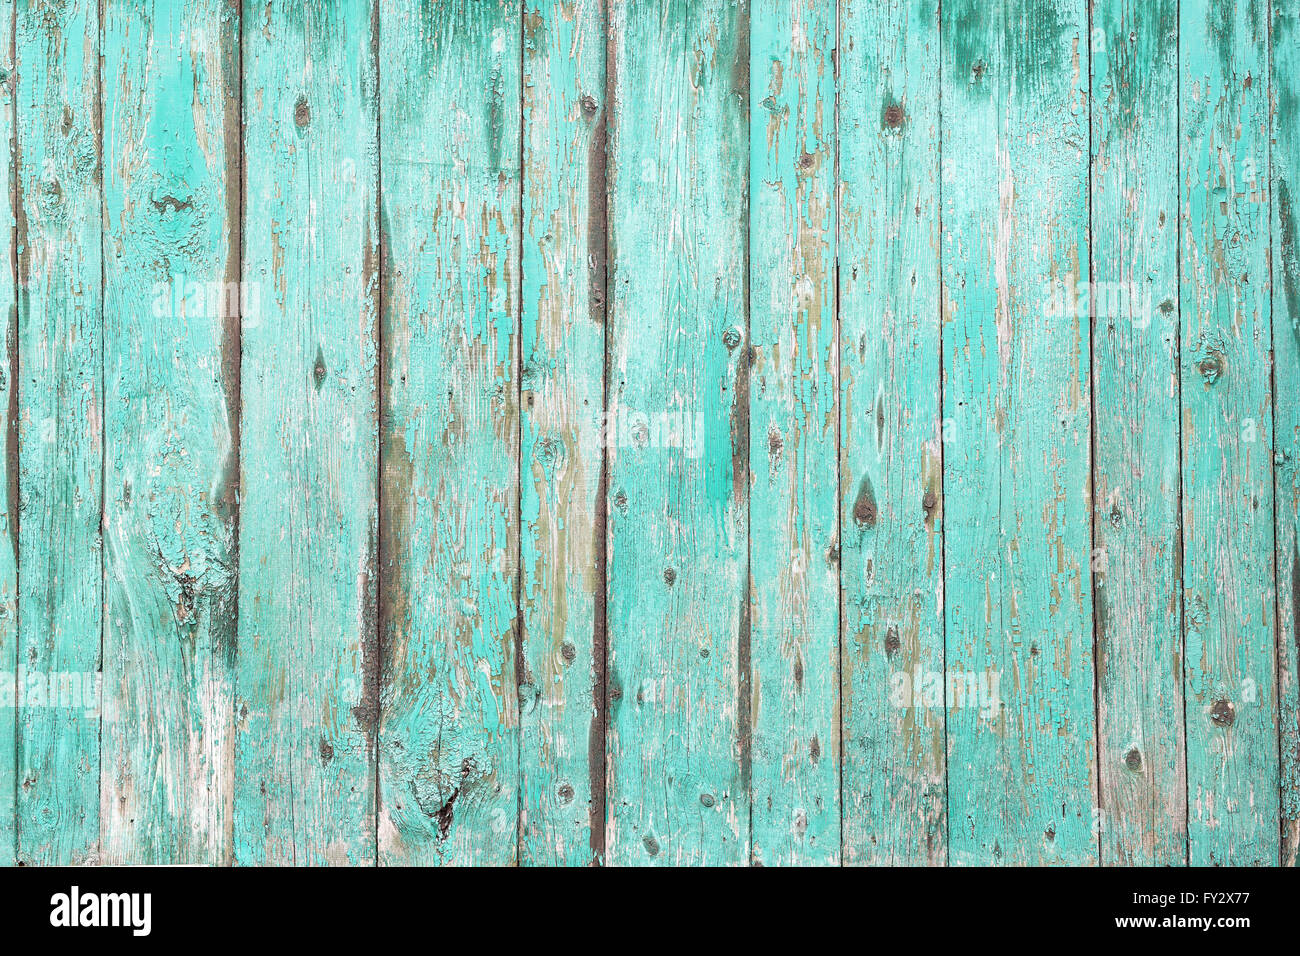 Old green wooden background. Picture of wooden structure. Stock Photo